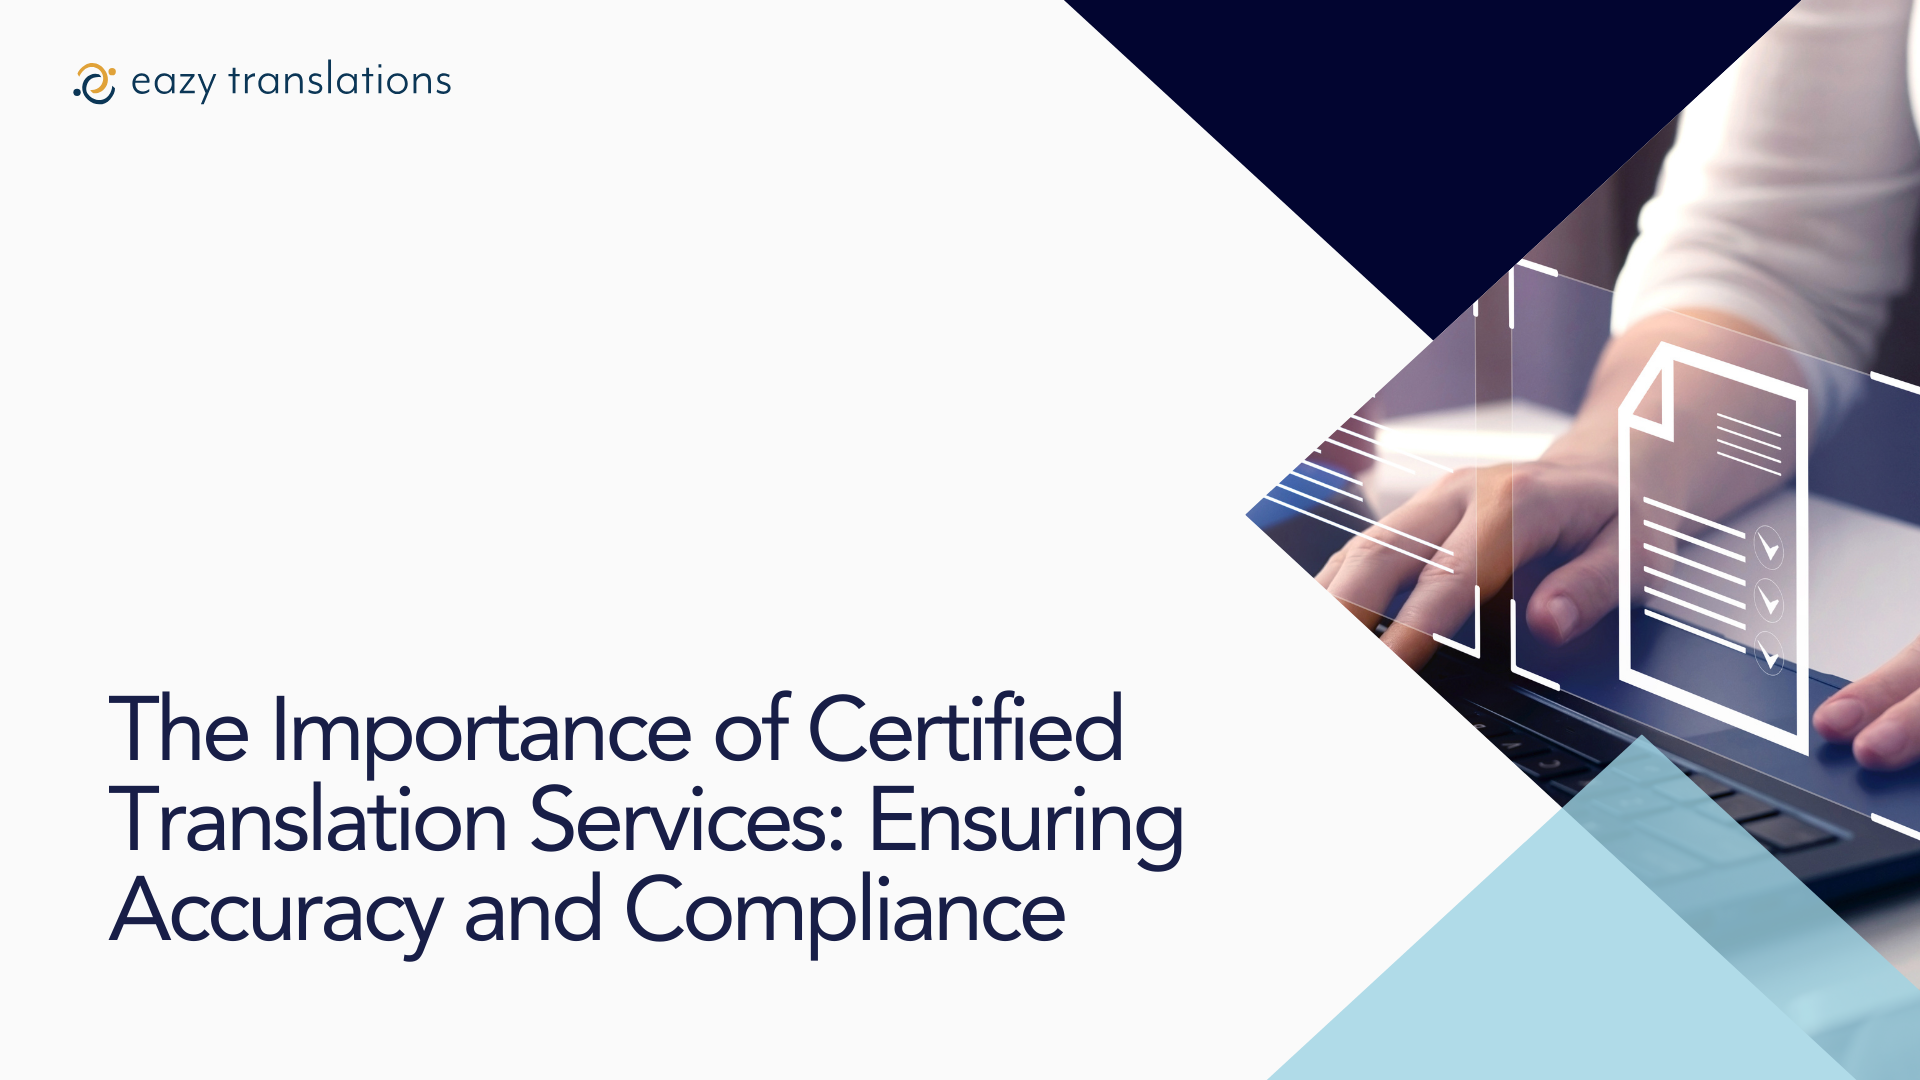 The Importance of Certified Translation Services: Ensuring Accuracy and Compliance